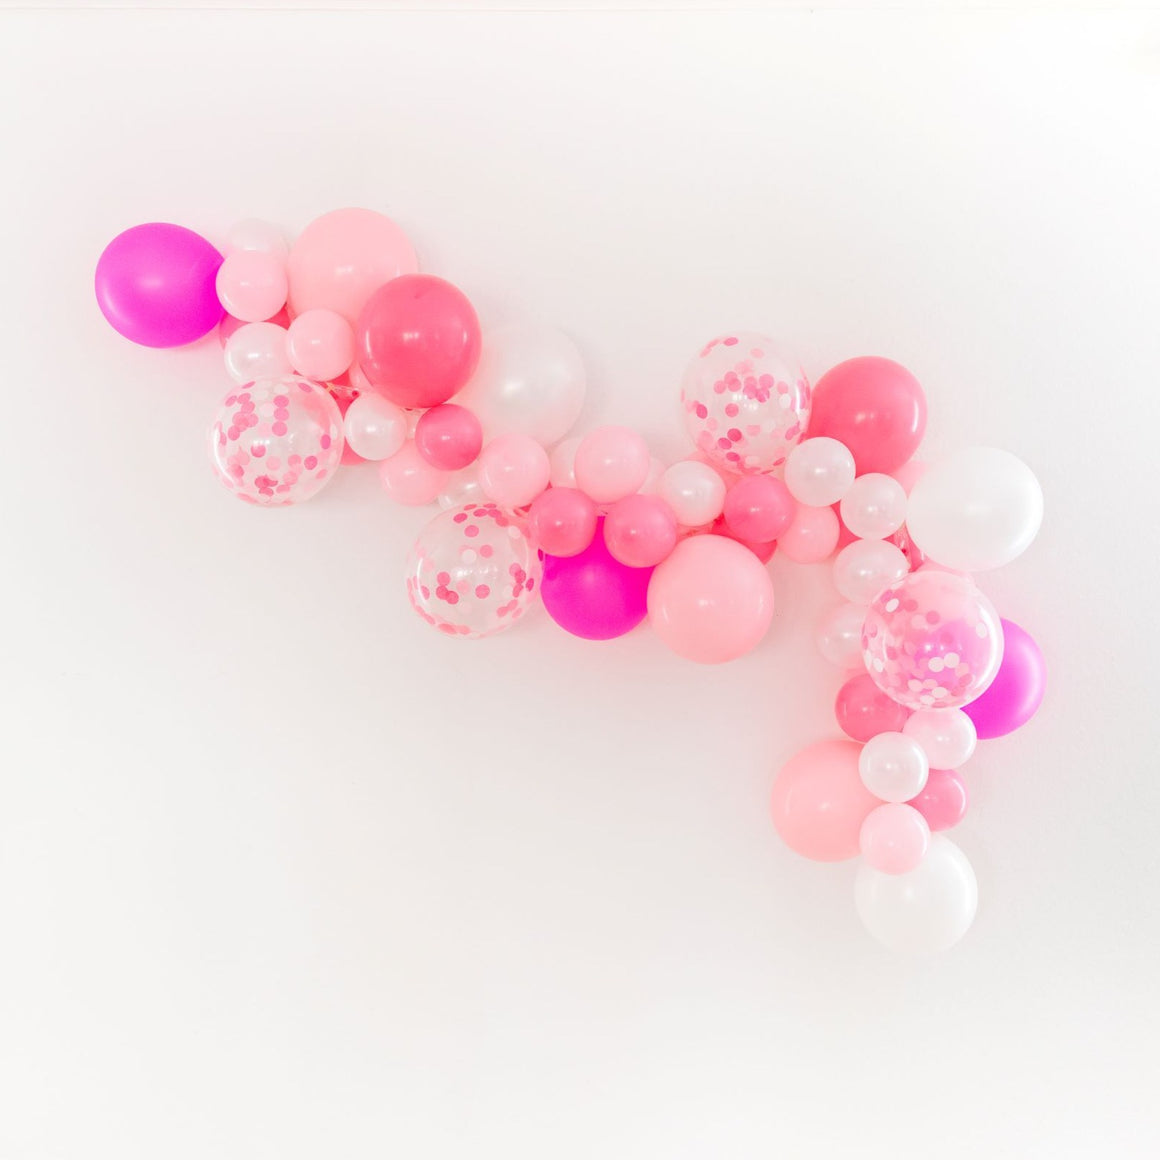 A side view of a pretty valentines themed garland is draped across a white wall. The garland is made of pink, rose, pearl white, neon magenta, and matching confetti balloons.